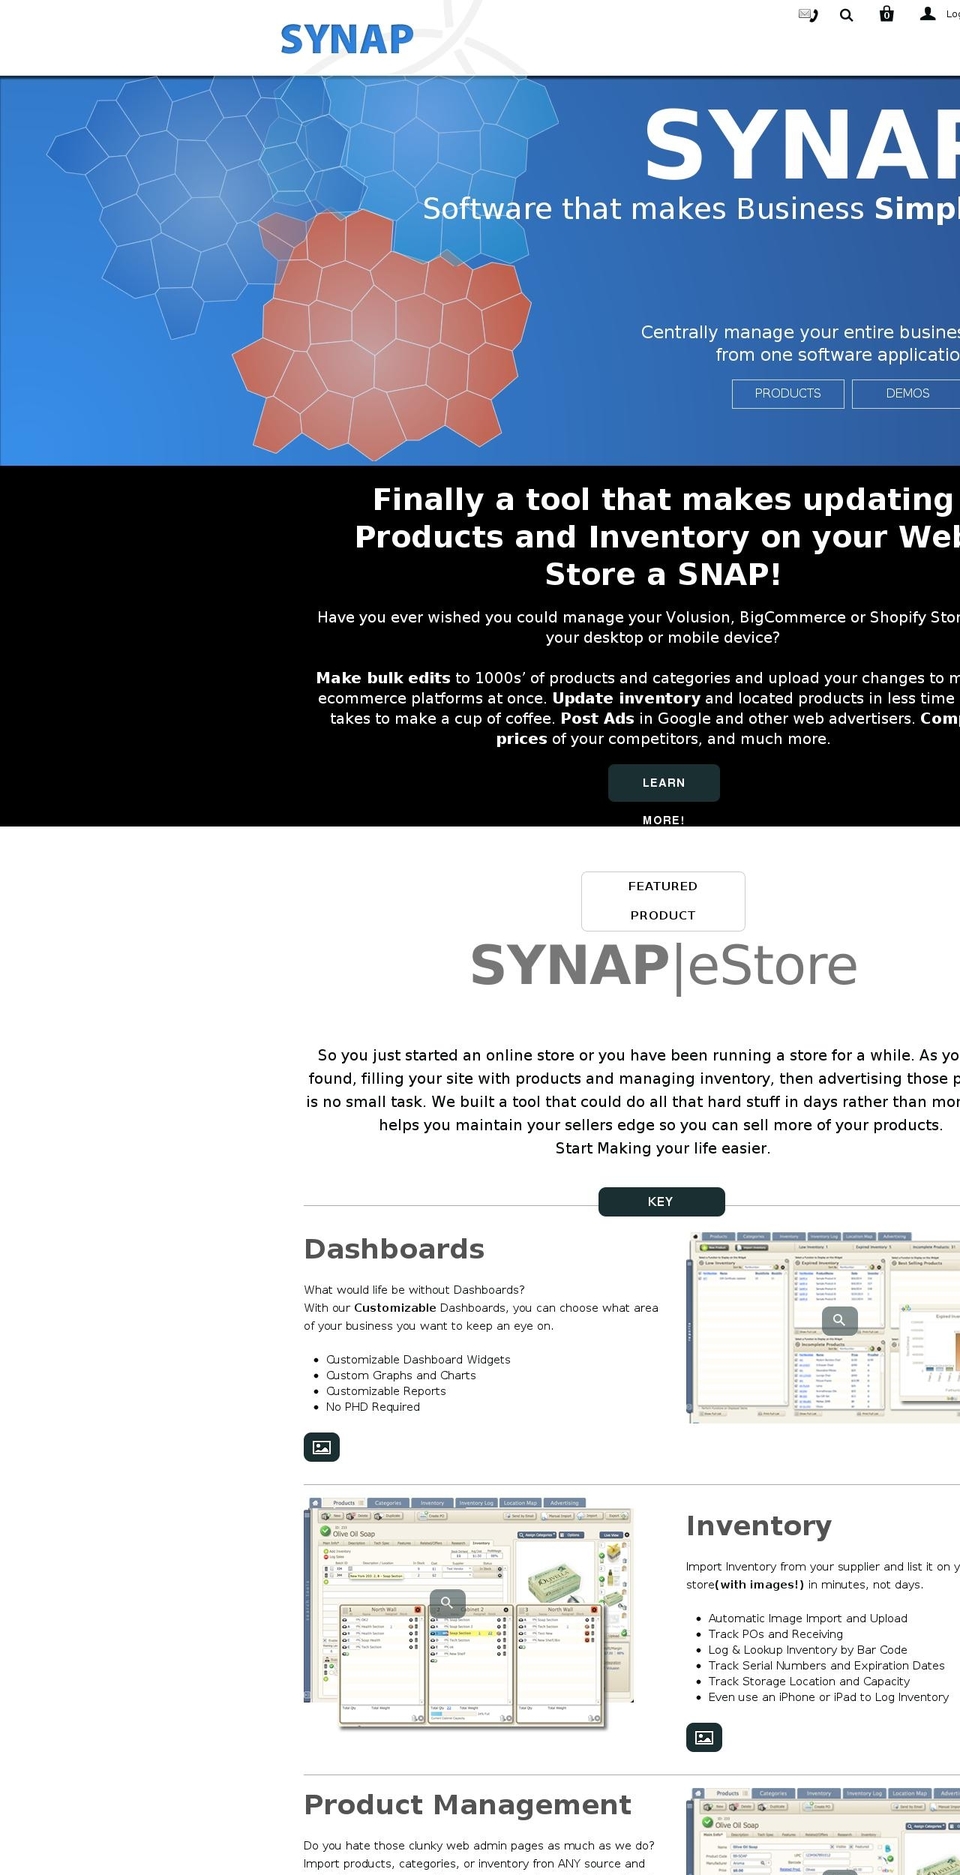 Startup Shopify theme site example synap.net